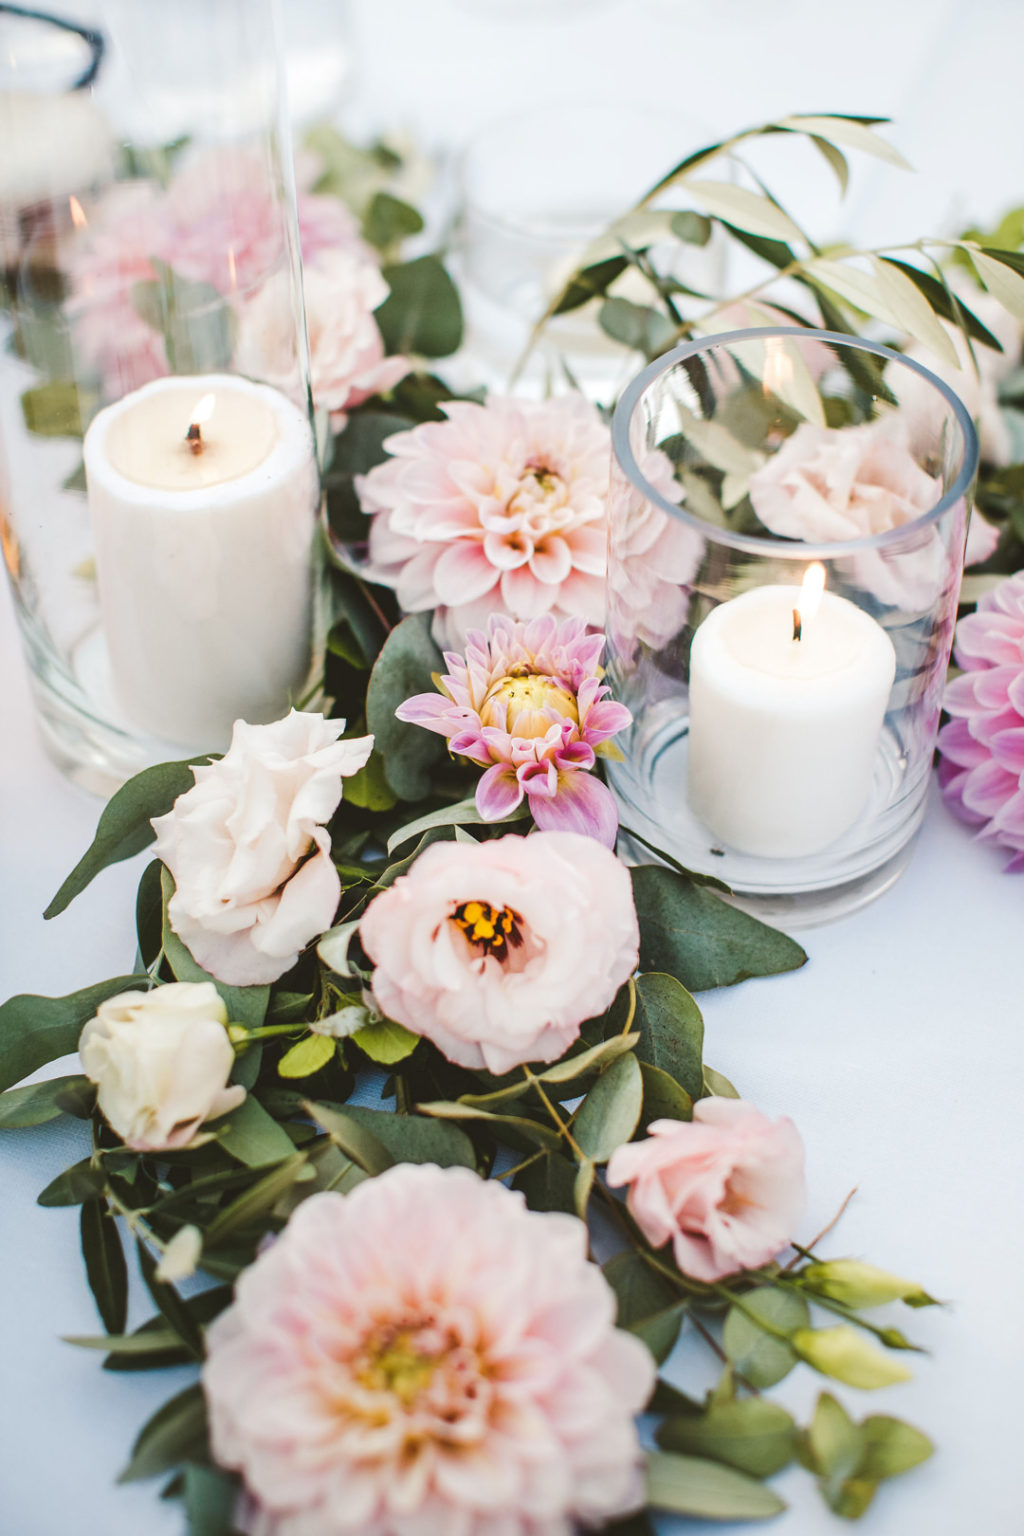 The weddin decor was lush, tender and romantic, with candles and pink blooms